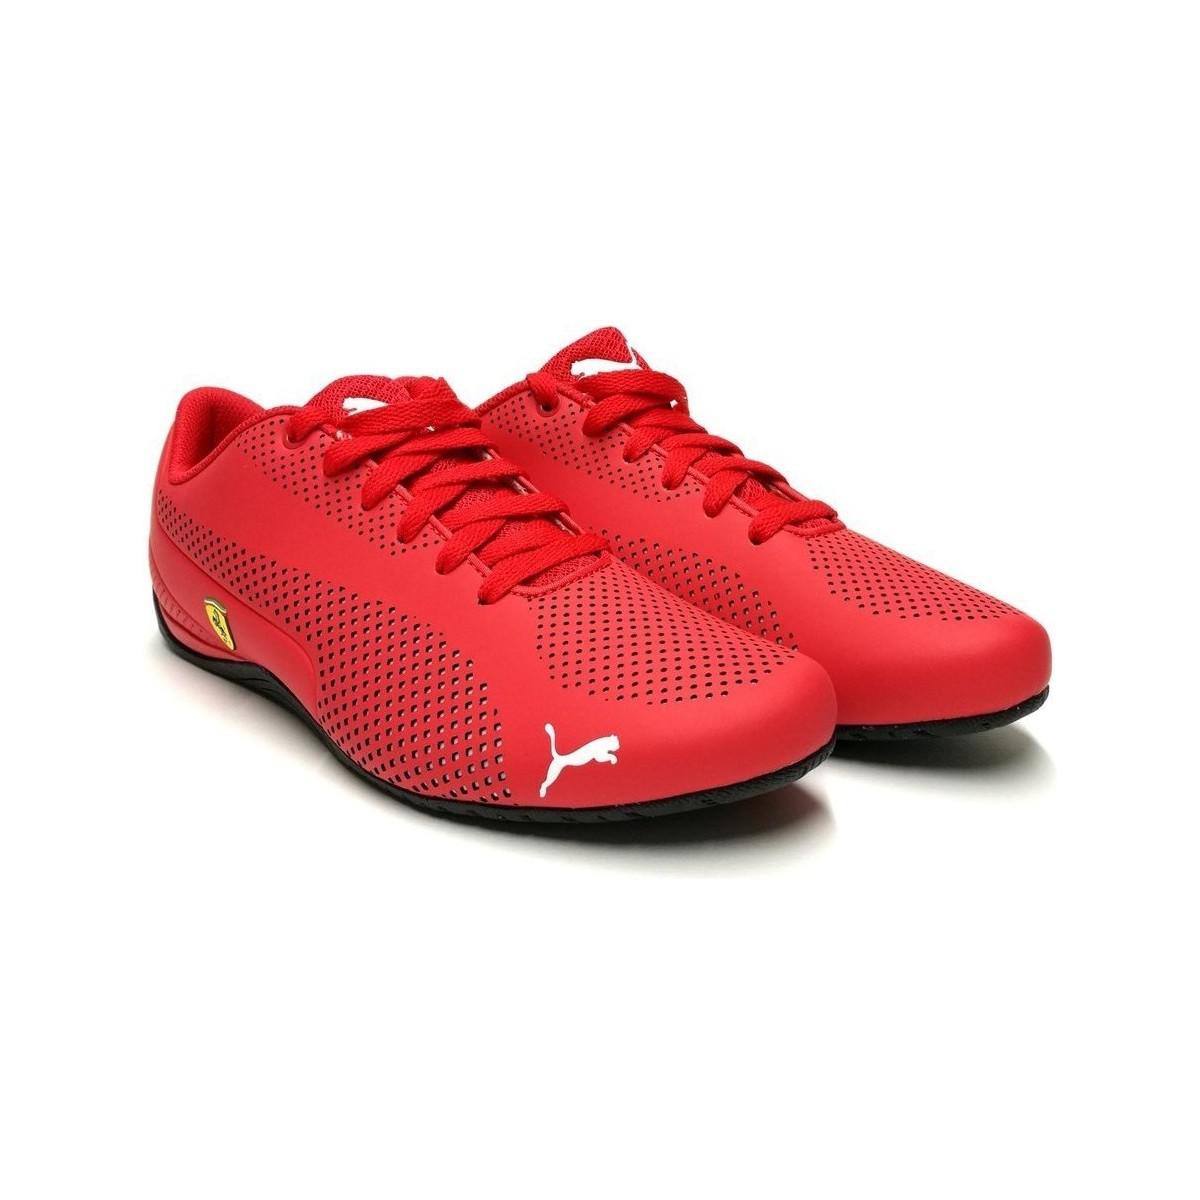 PUMA Sf Drift Cat 5 Ultra Men's Shoes (trainers) In Red for Men - Lyst